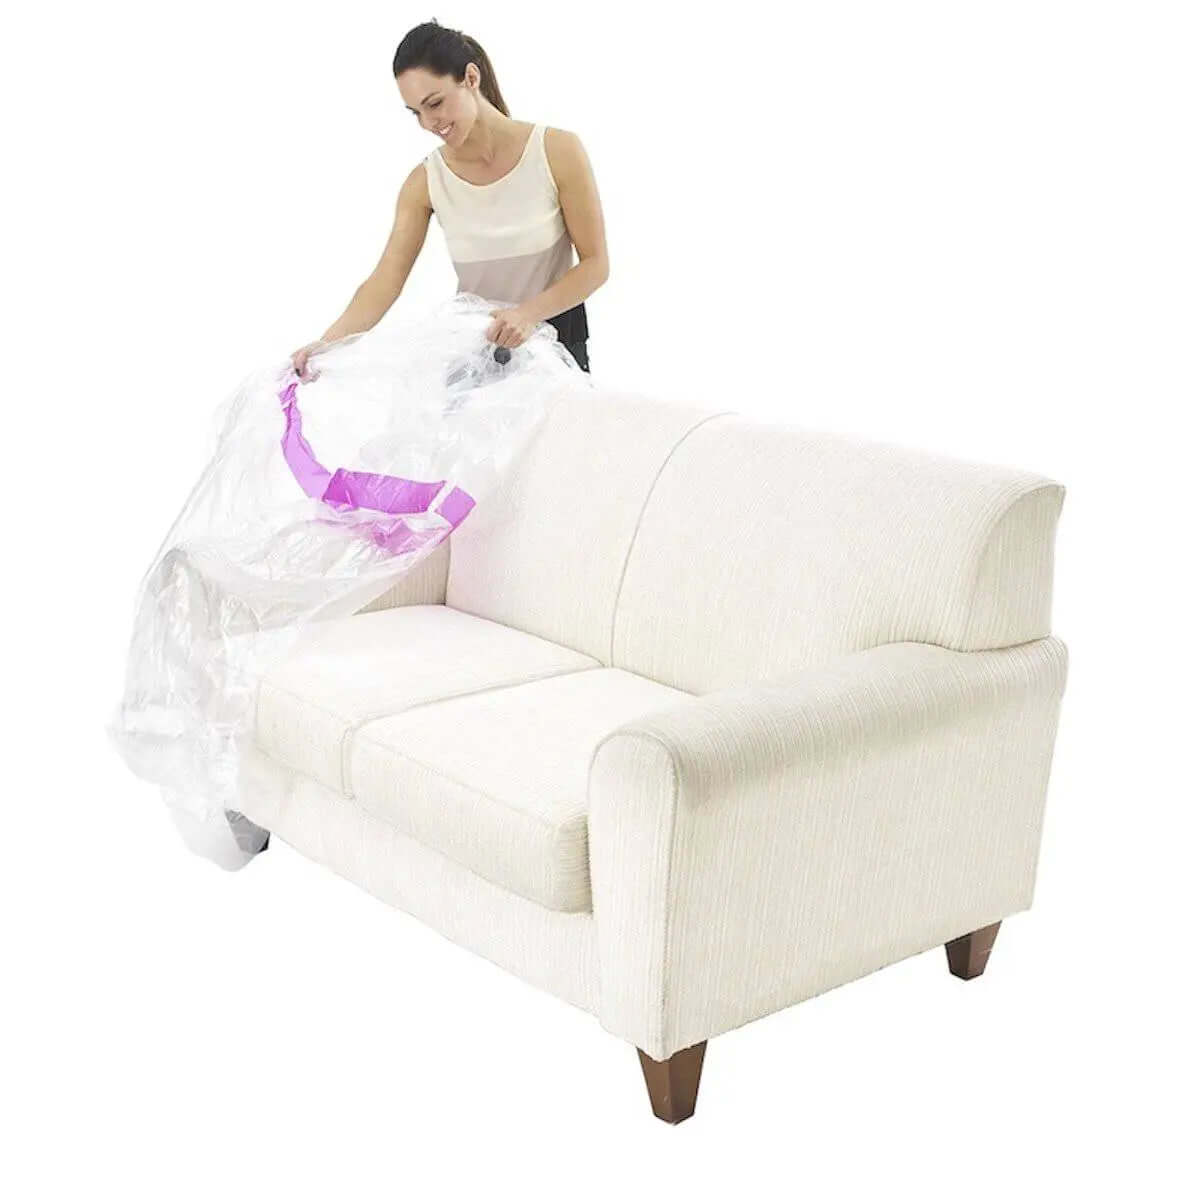 Furniture Protection Covers for Moving and Storage   Storage Bags and Covers Packstore Australia Packstore